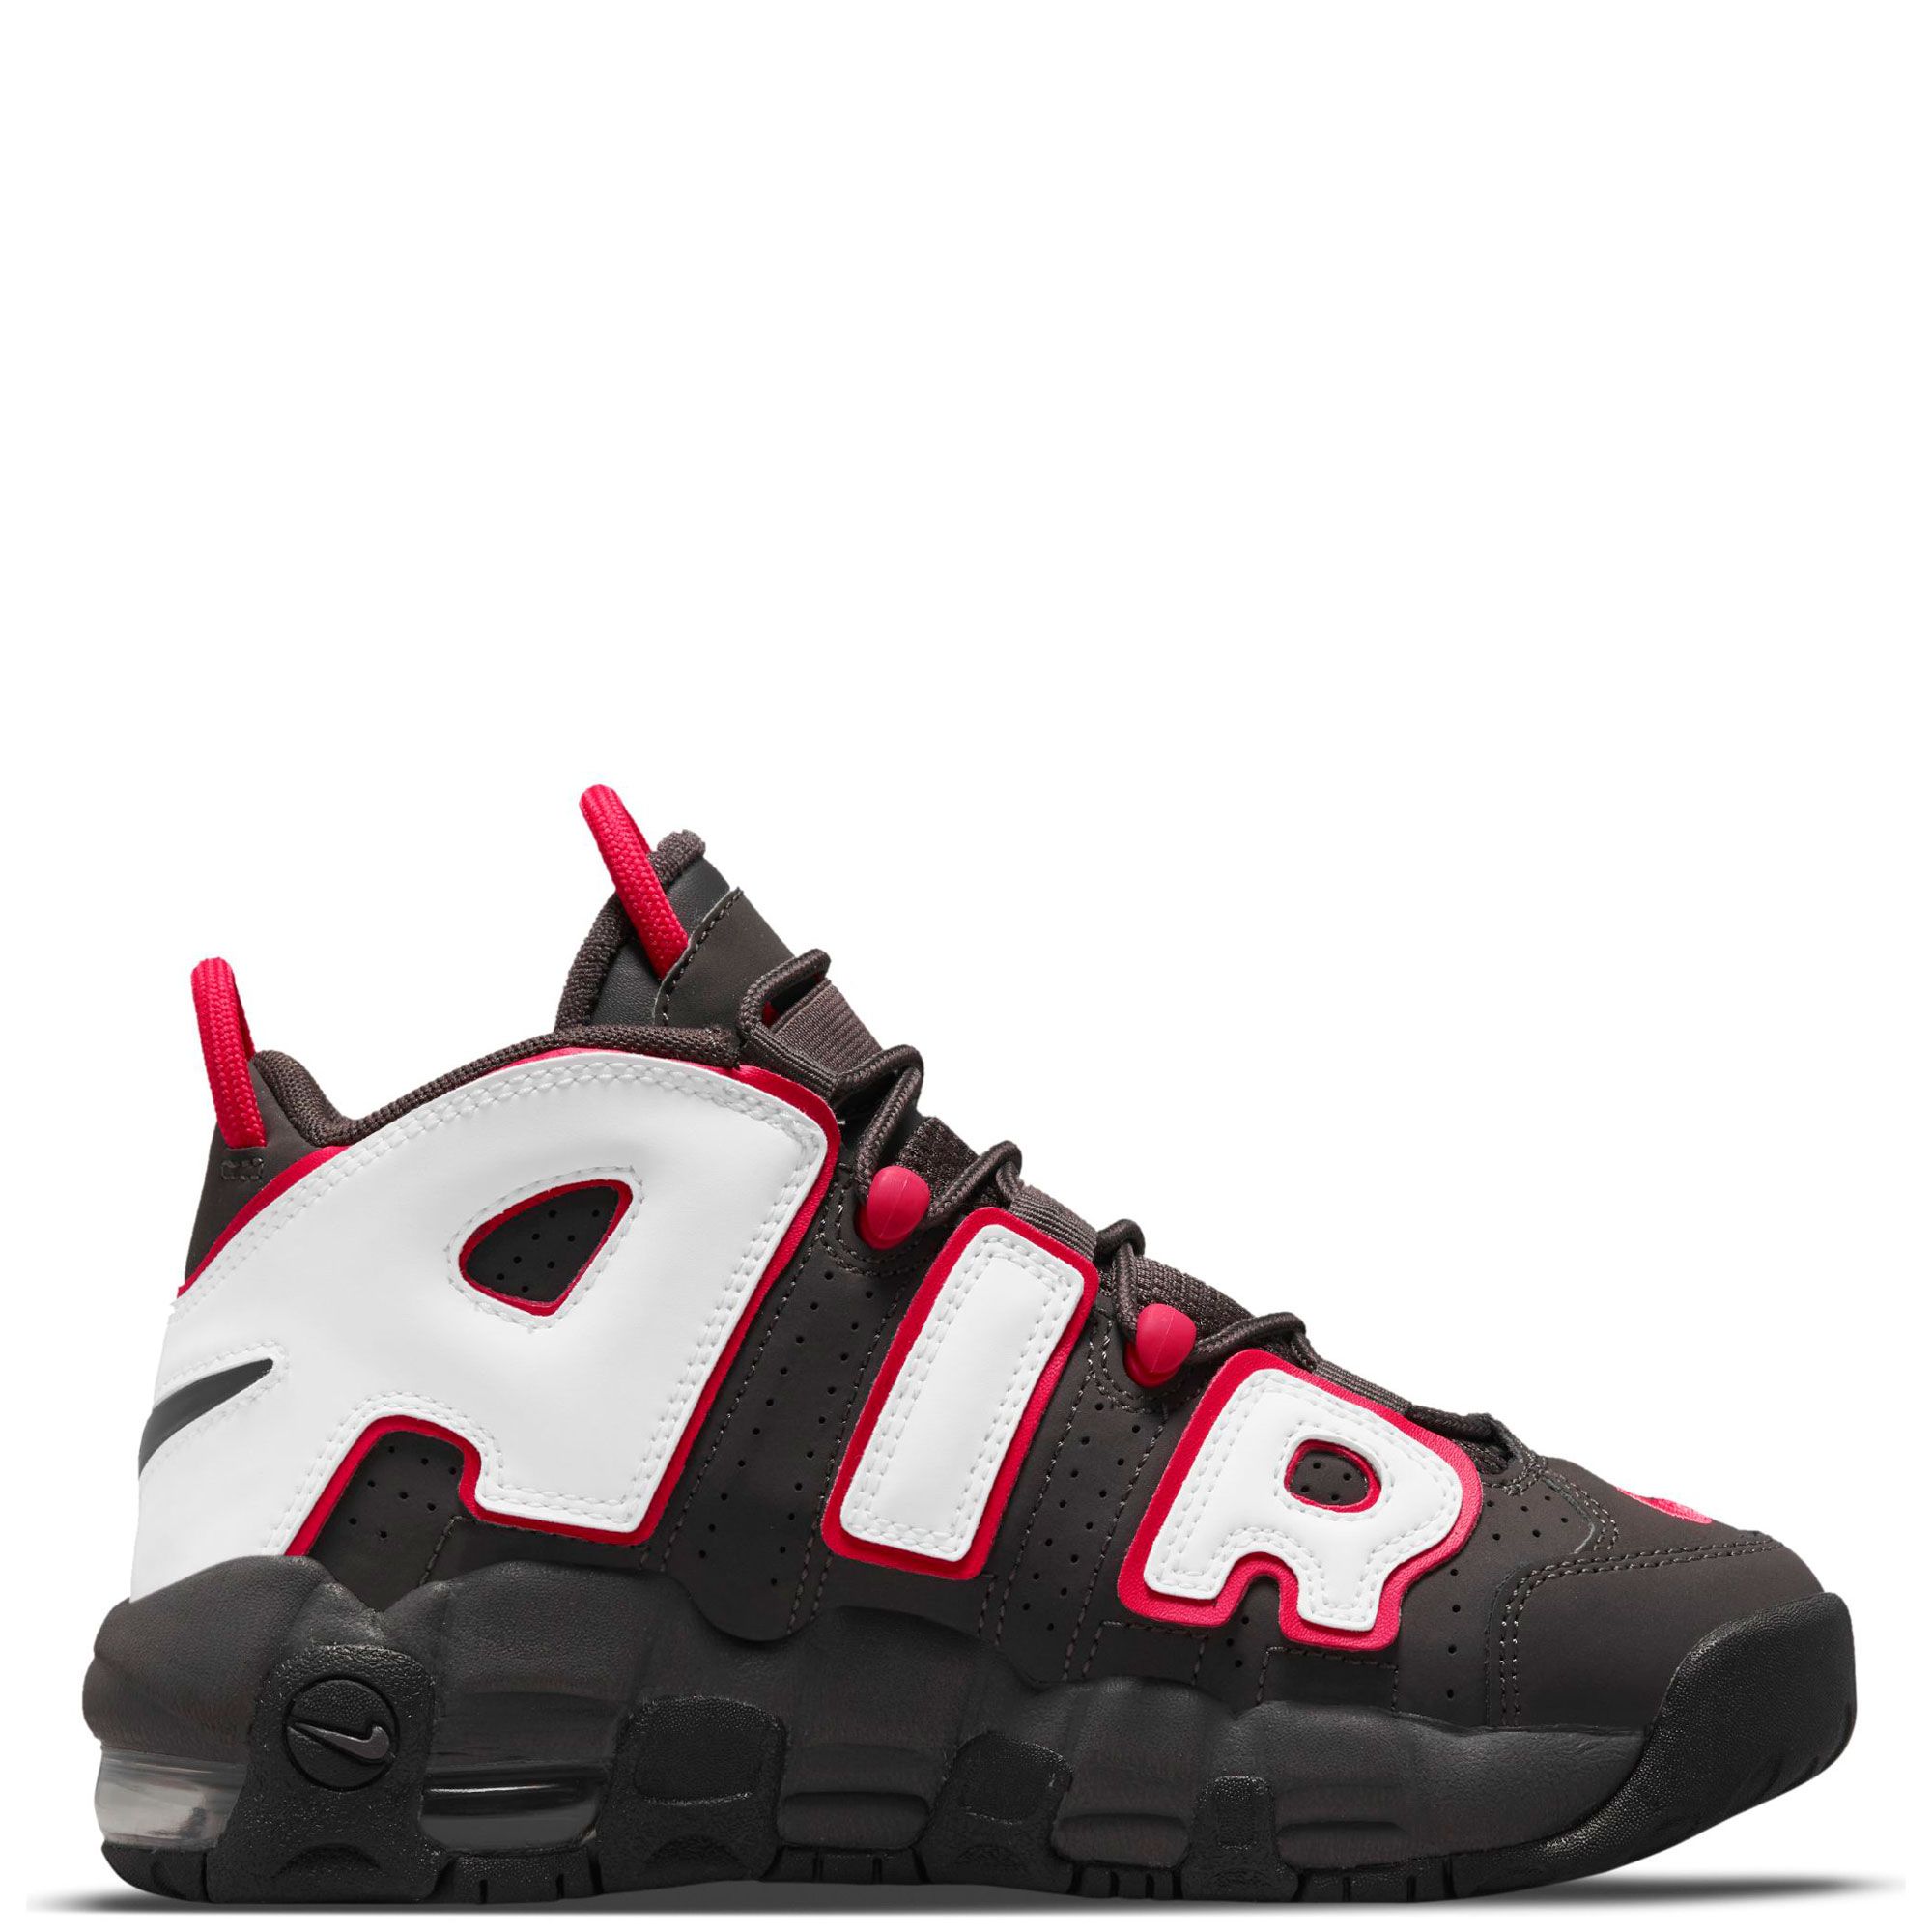 Nike Air More Uptempo Black/Red GS 4Y